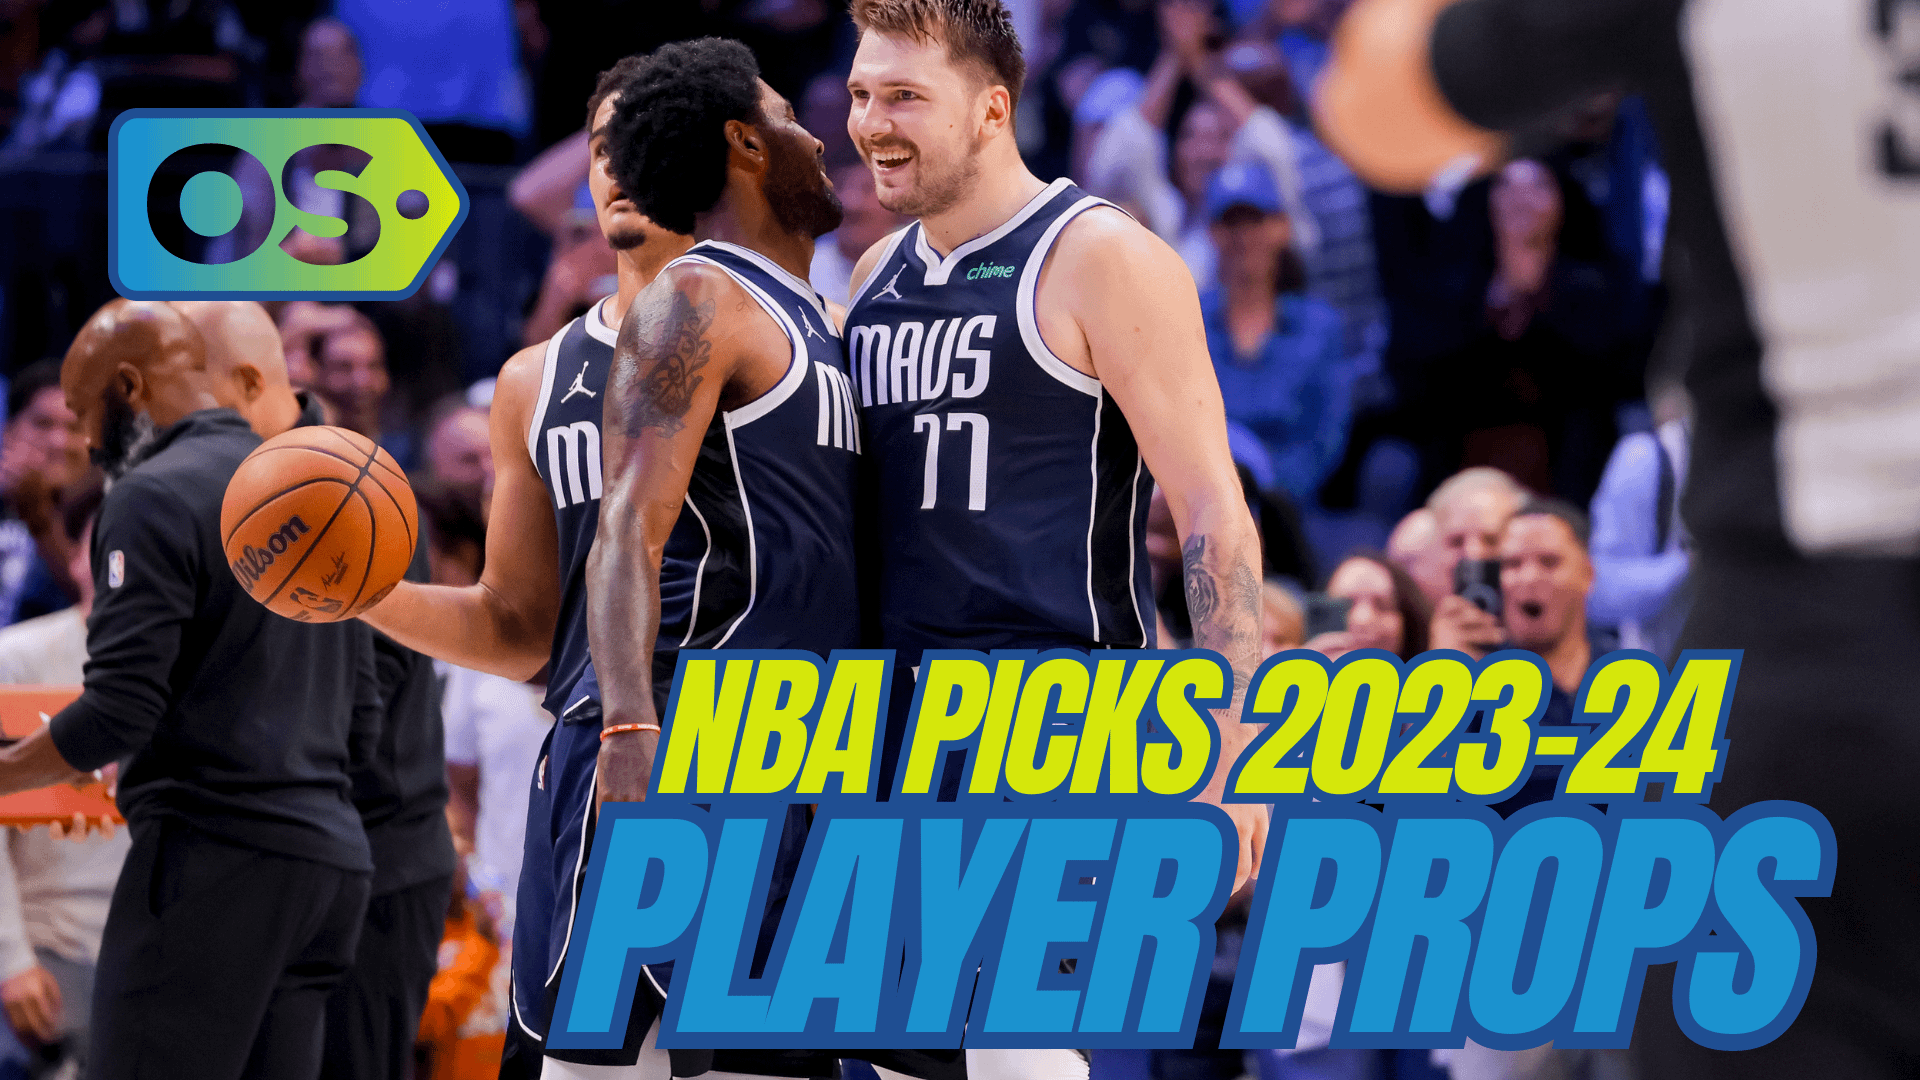 The best NBA player prop bets and picks today for Monday, March 25, include wagers on Luka Doncic and Darius Garland...